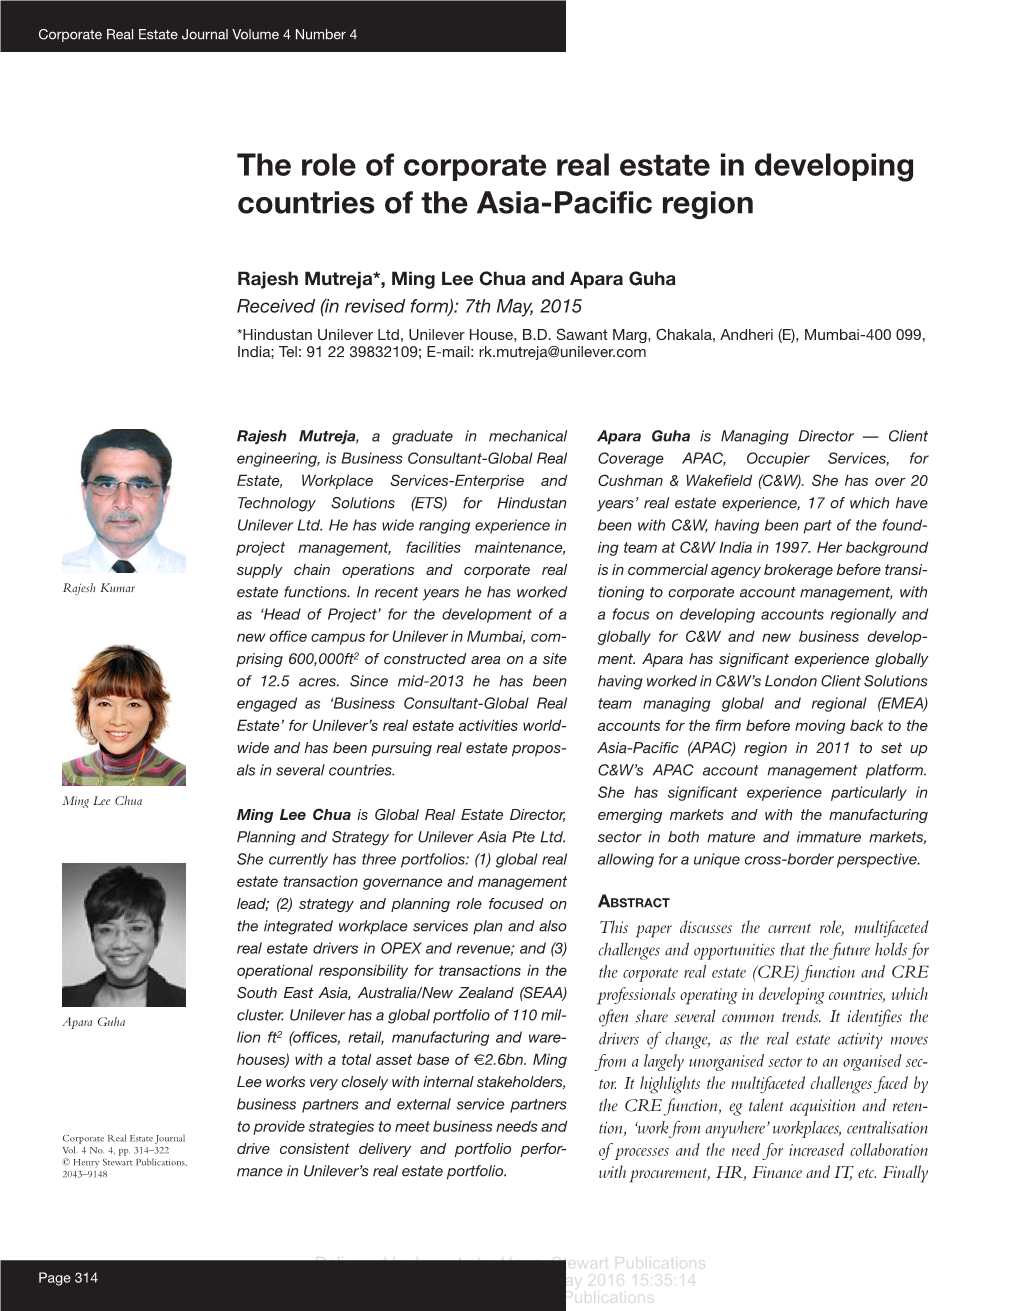 The Role of Corporate Real Estate in Developing Countries of the Asia-Pacific Region